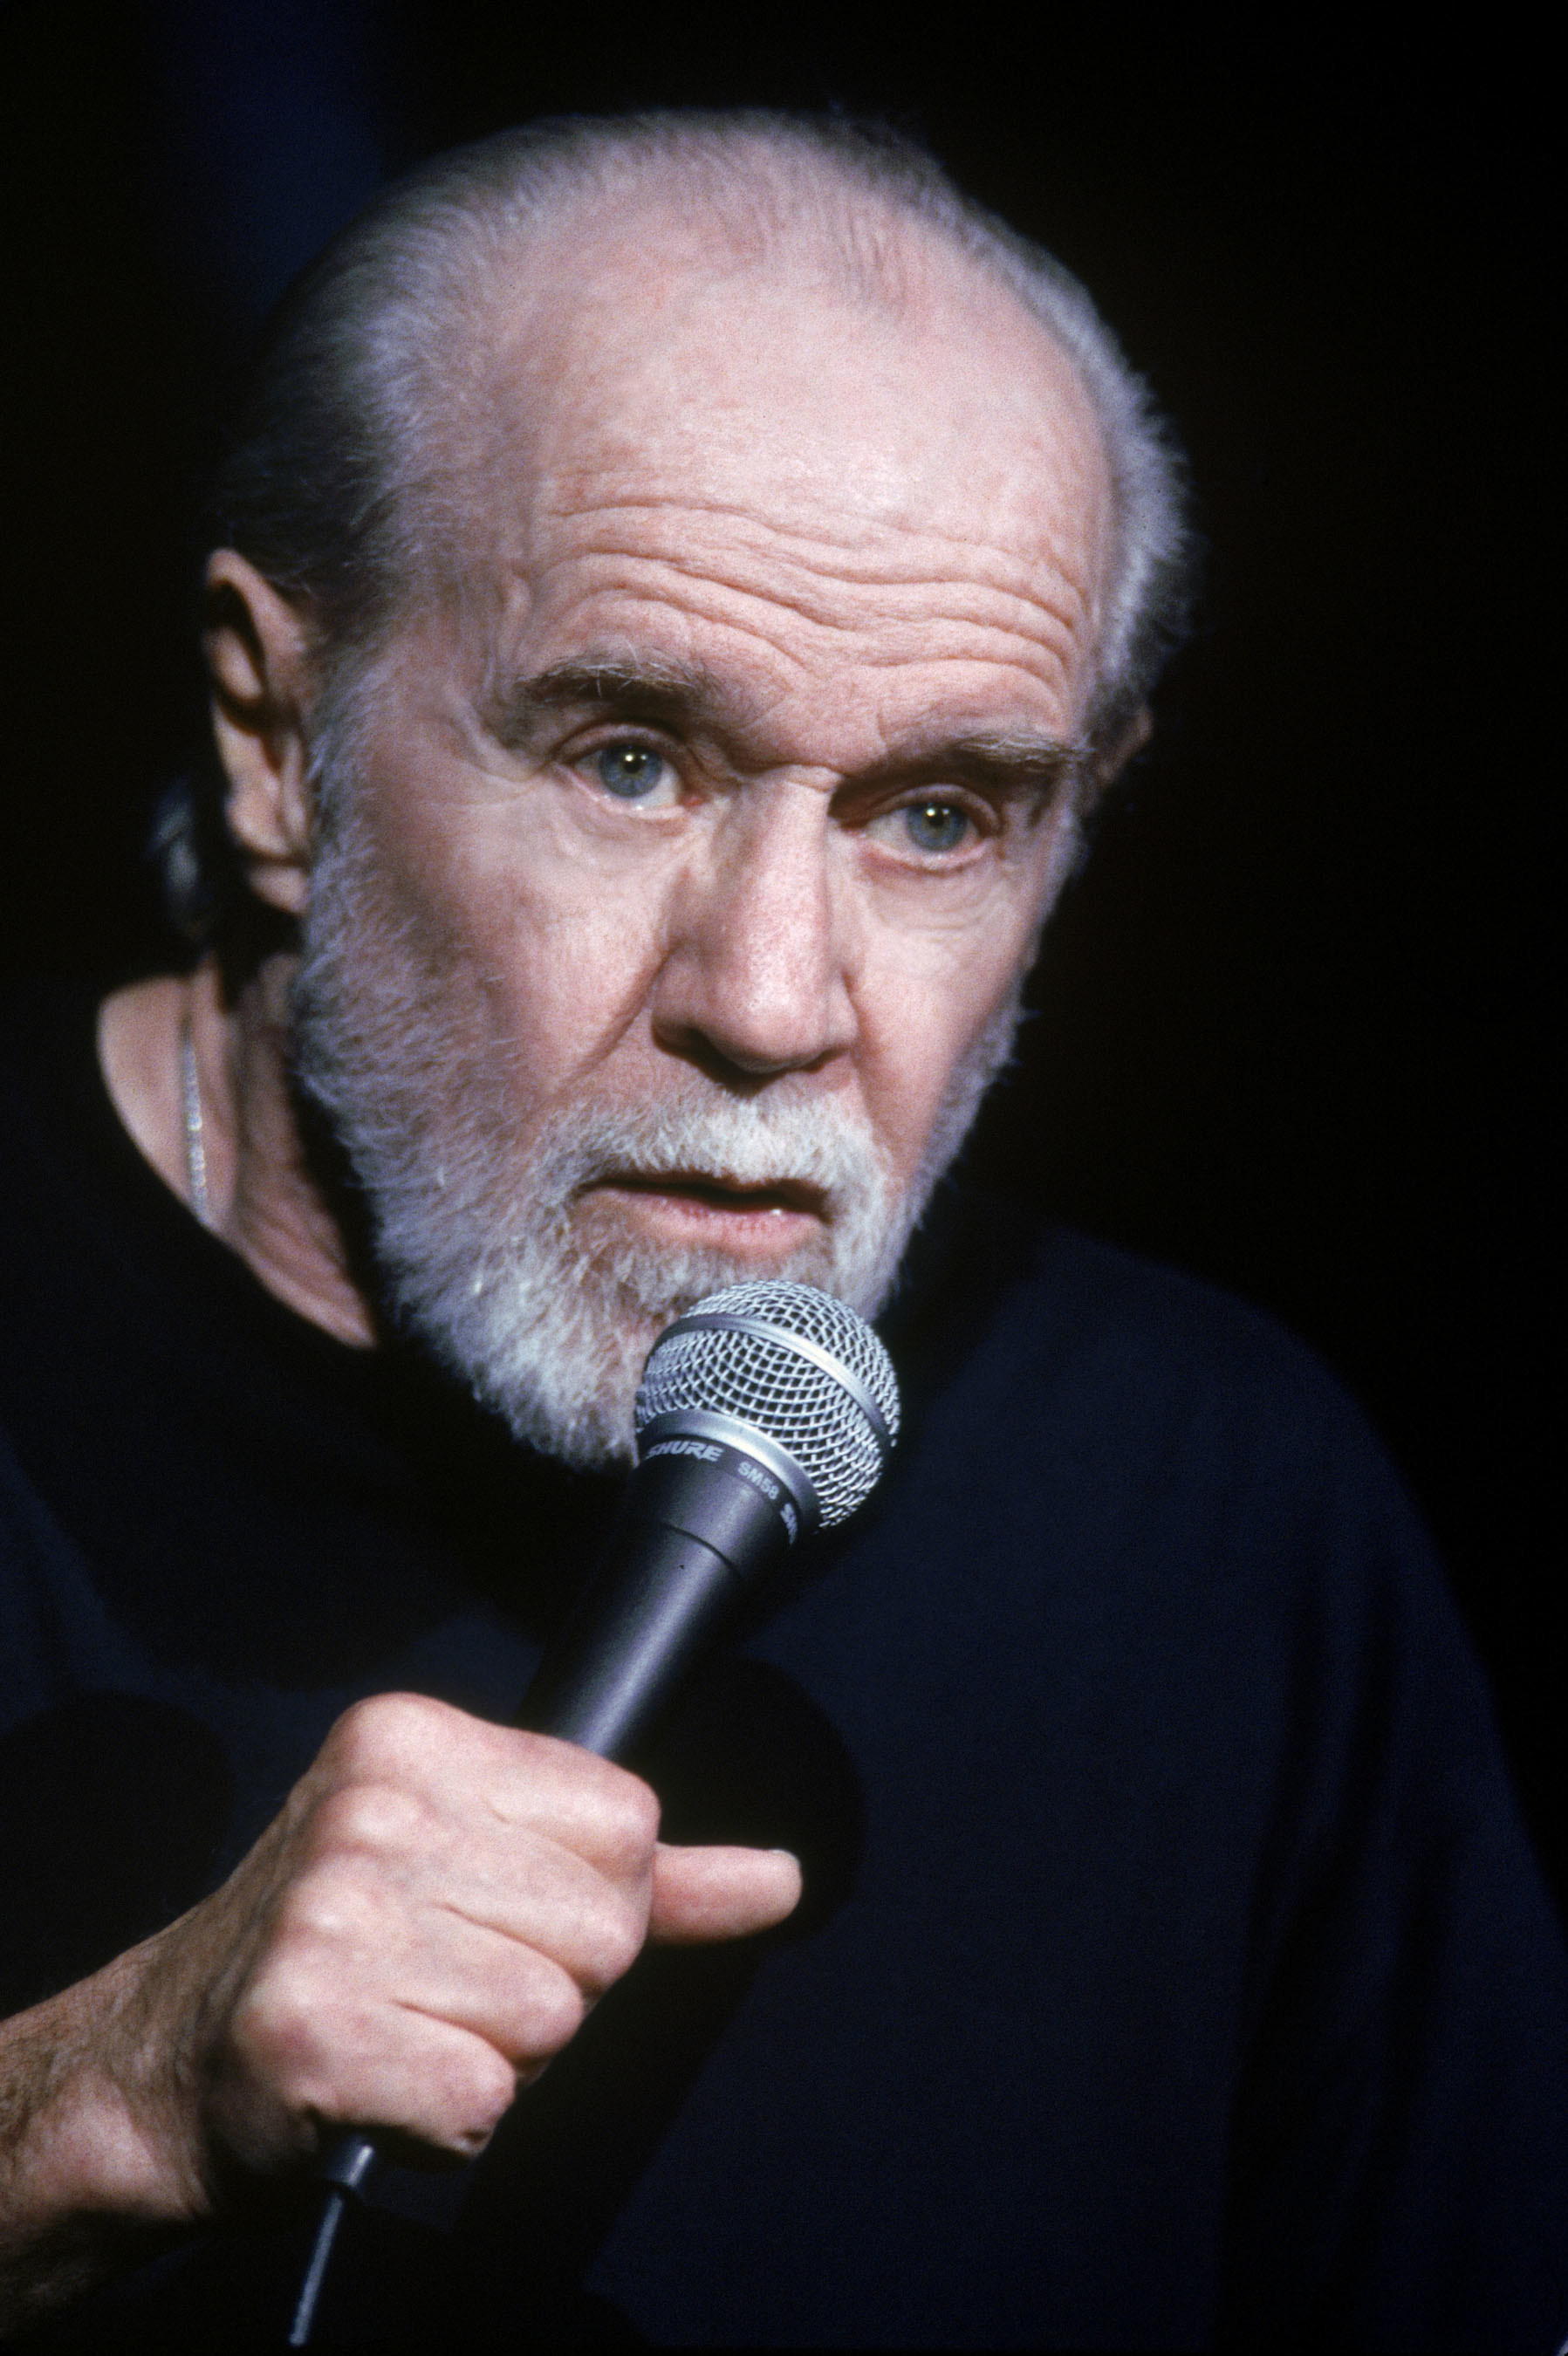 New George Carlin Album to Premiere on SiriusXM September 1. Photo courtesy of The George Carlin Estate.